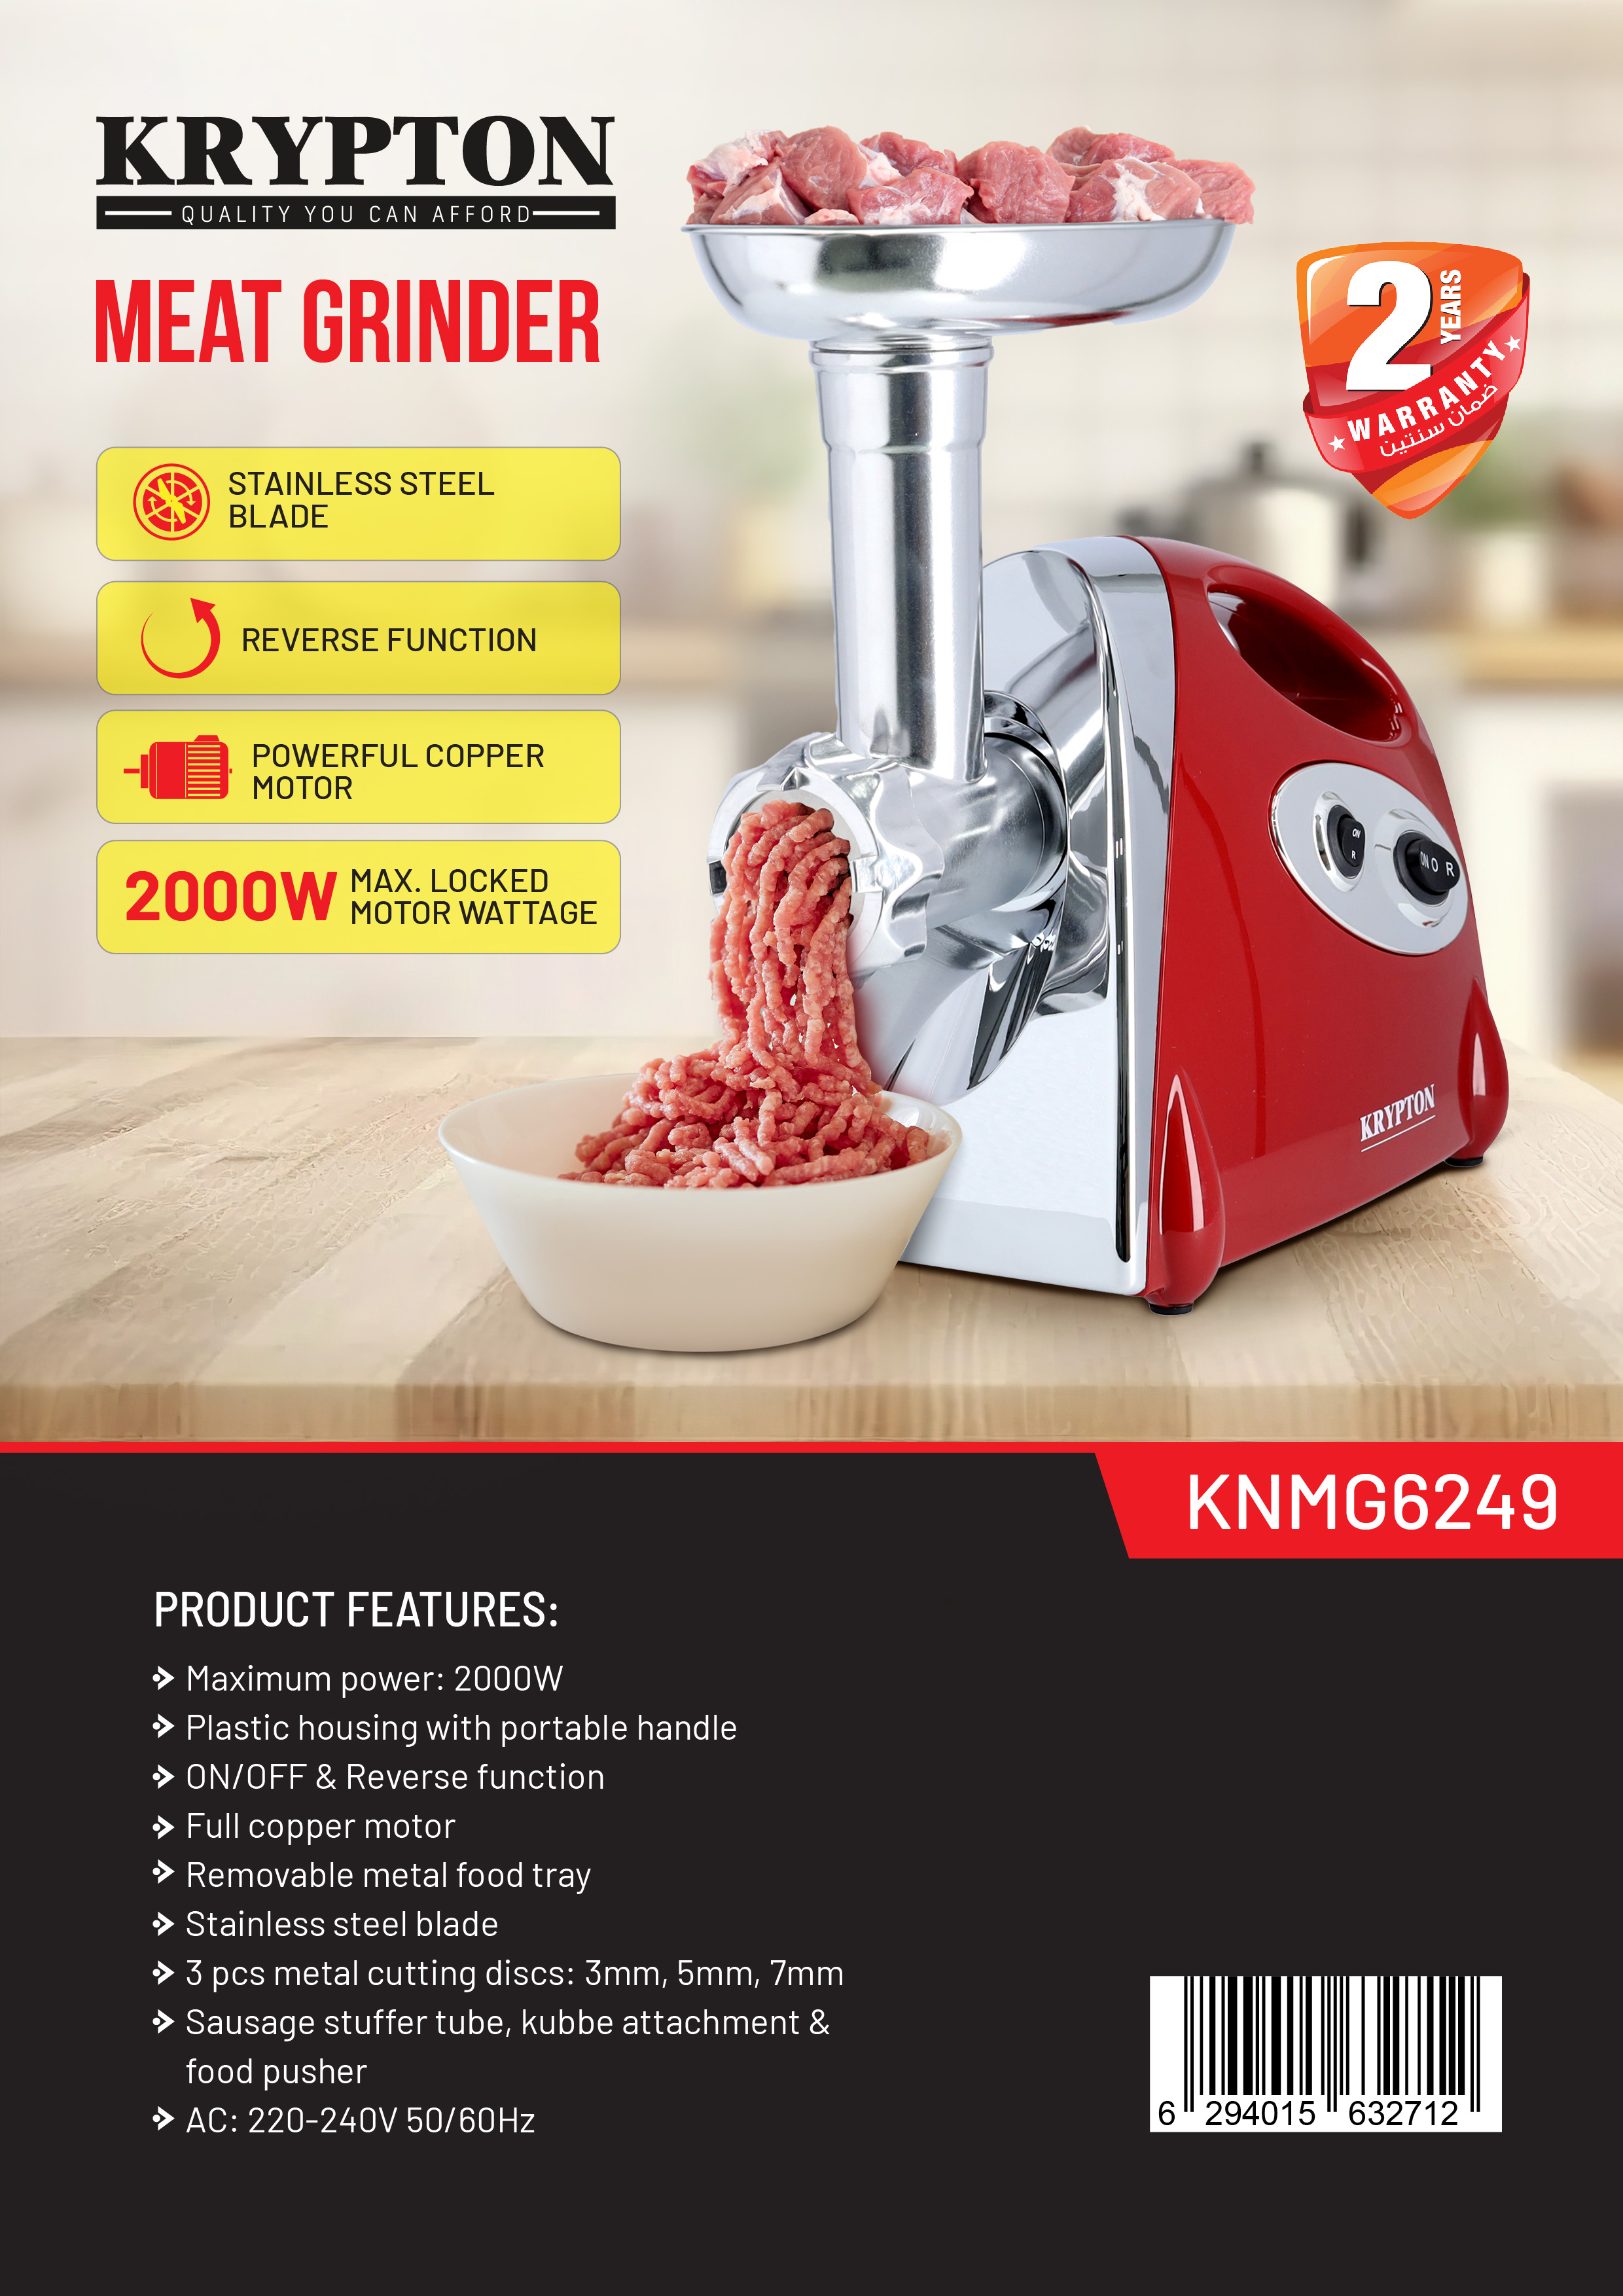 Manual Meat Grinder - Mincer w 2 Stainless Steel Plates, Sausage  Attachment, Press, Heavy Duty Suction Base and Dishwasher Safe Design- Make  Suasage